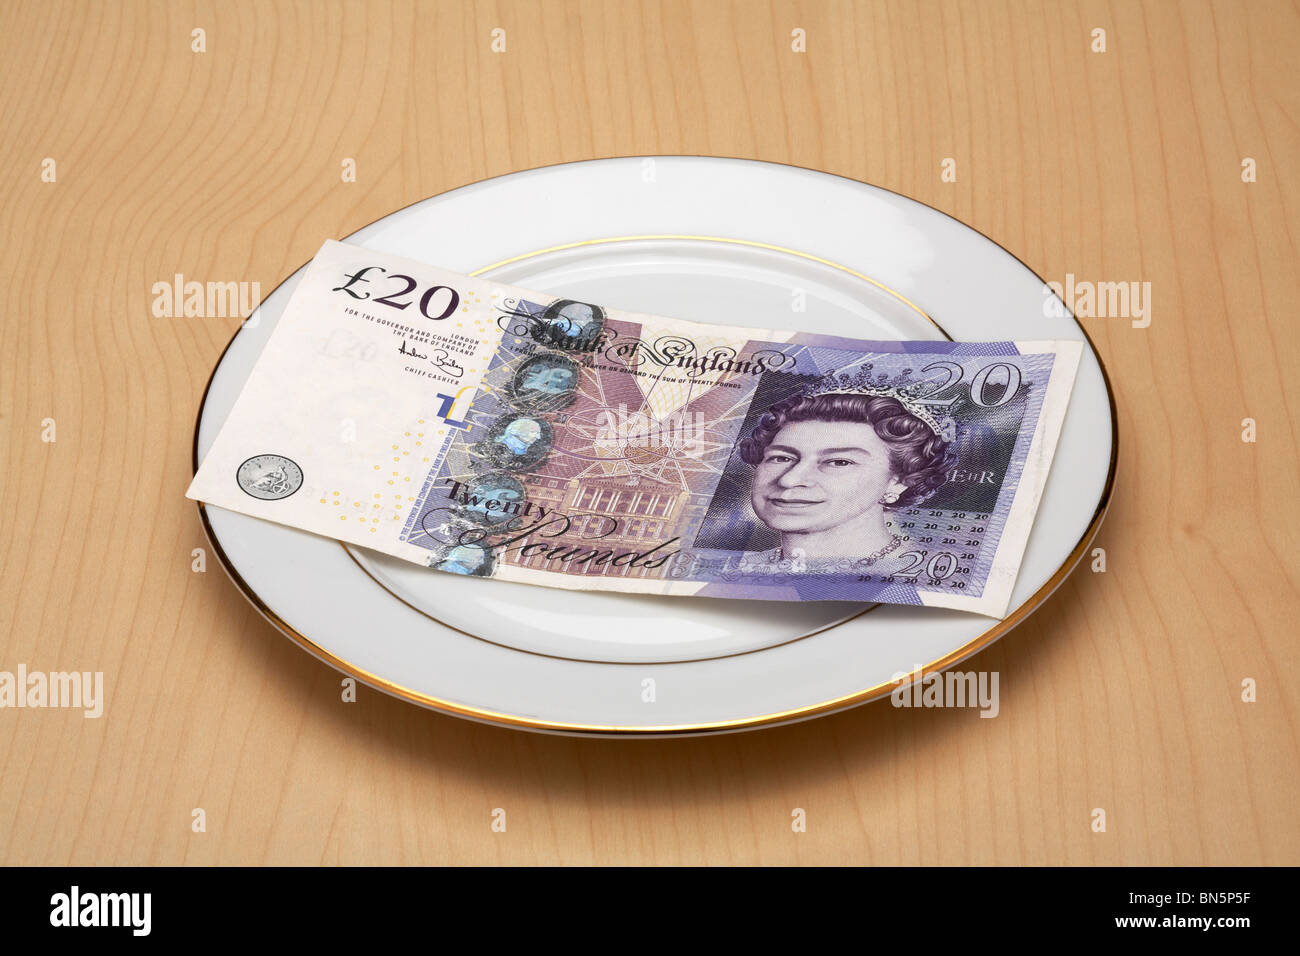 China Plate with UKP £20 Pound Note laying on it Stock Photo